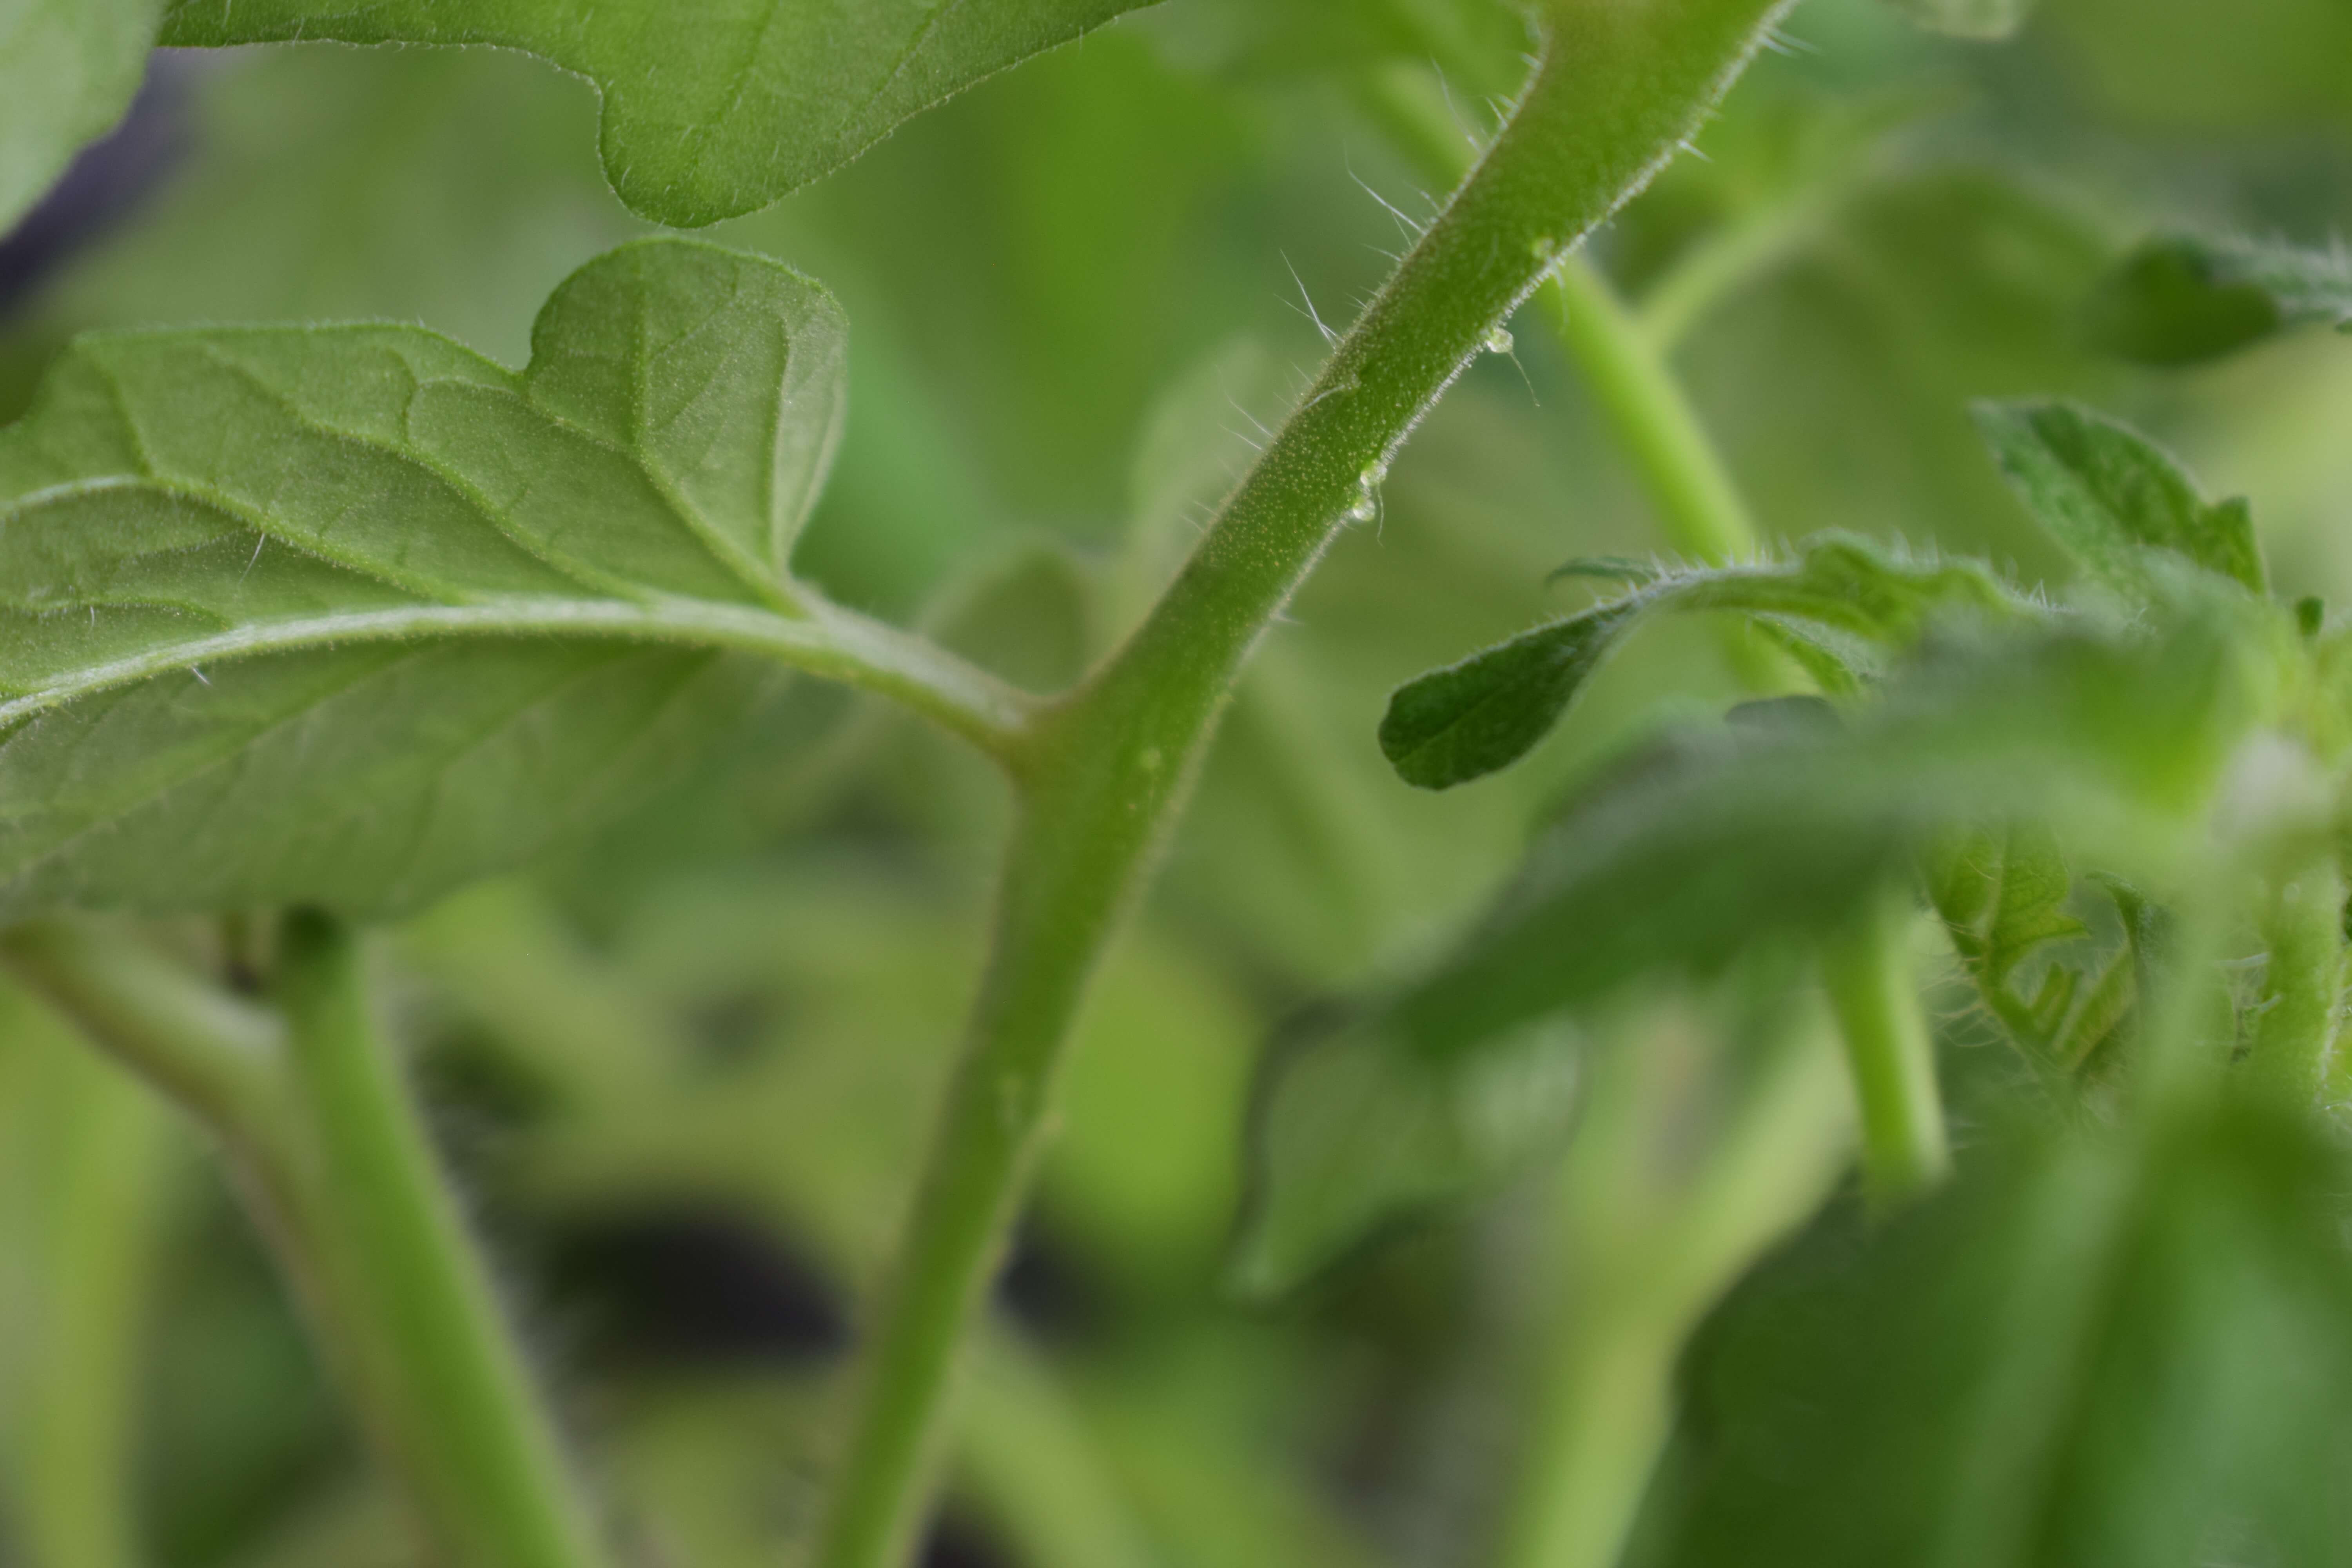 botany - What are these bumps on tomato stem? - Biology Stack Exchange